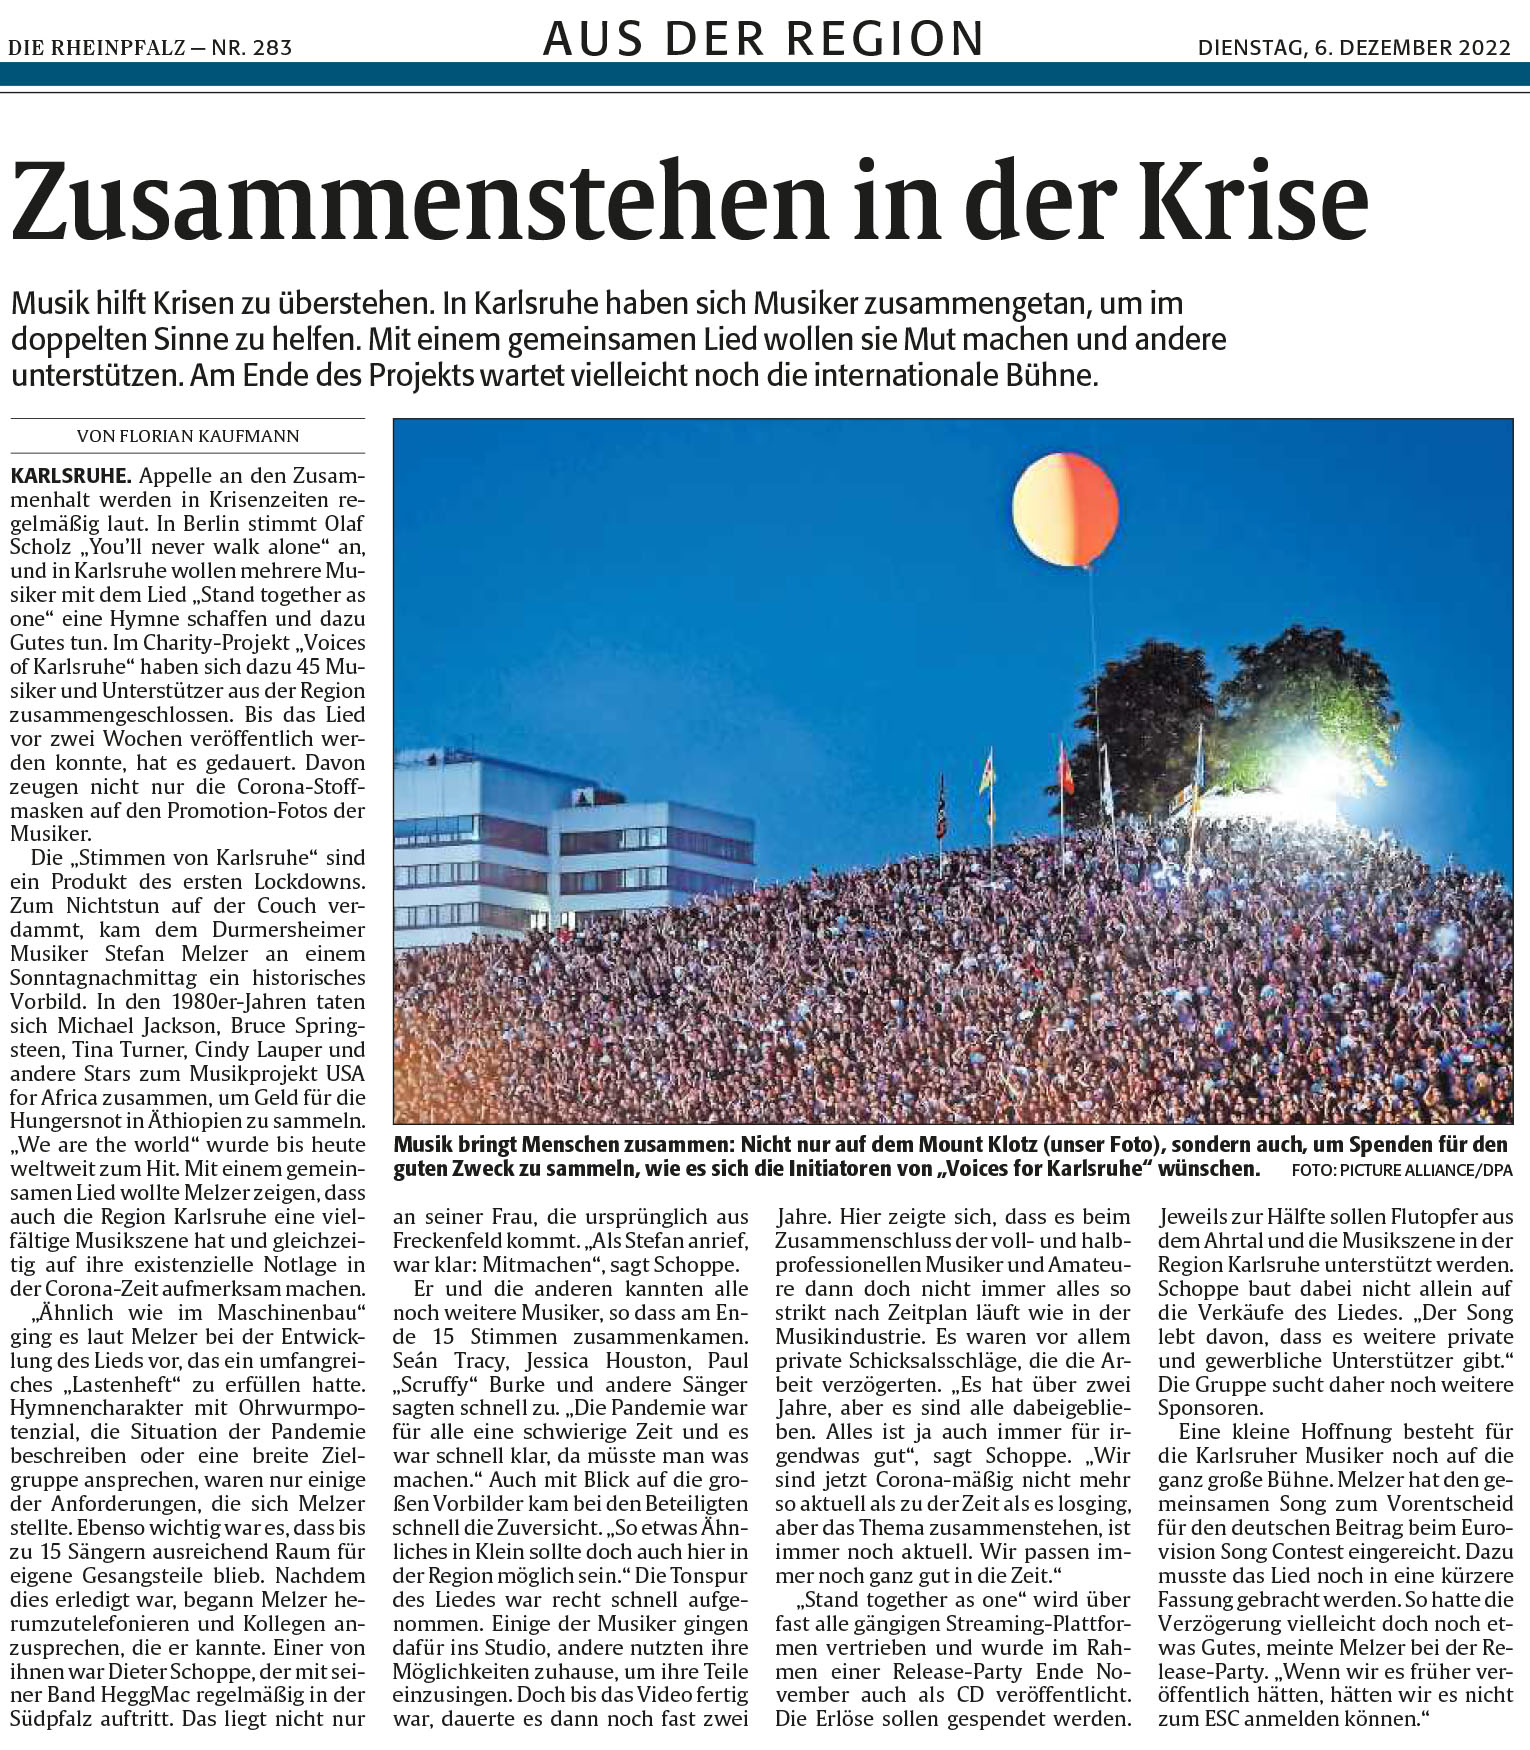 images/presse/voices-of-karlsruhe-voices-for-karlsruhe.jpg